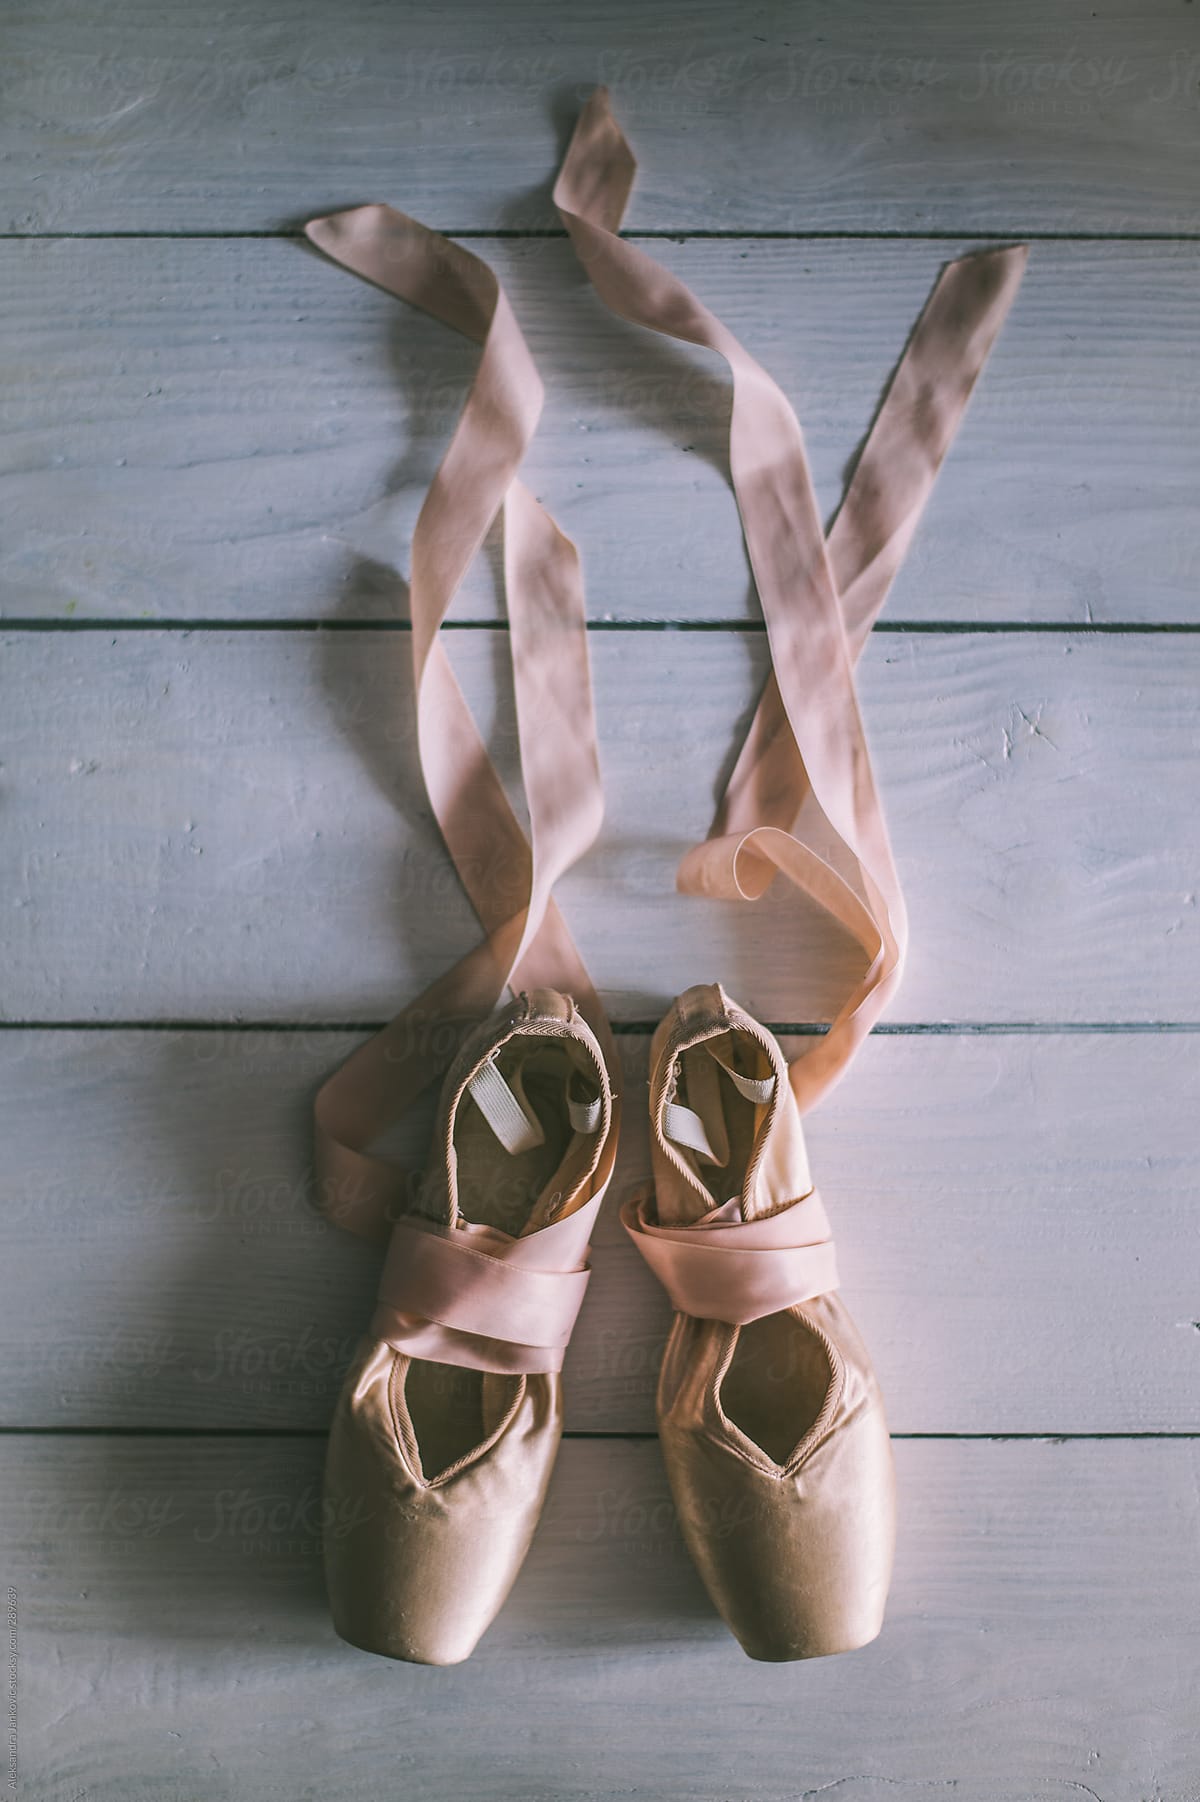 Pink ballet slippers